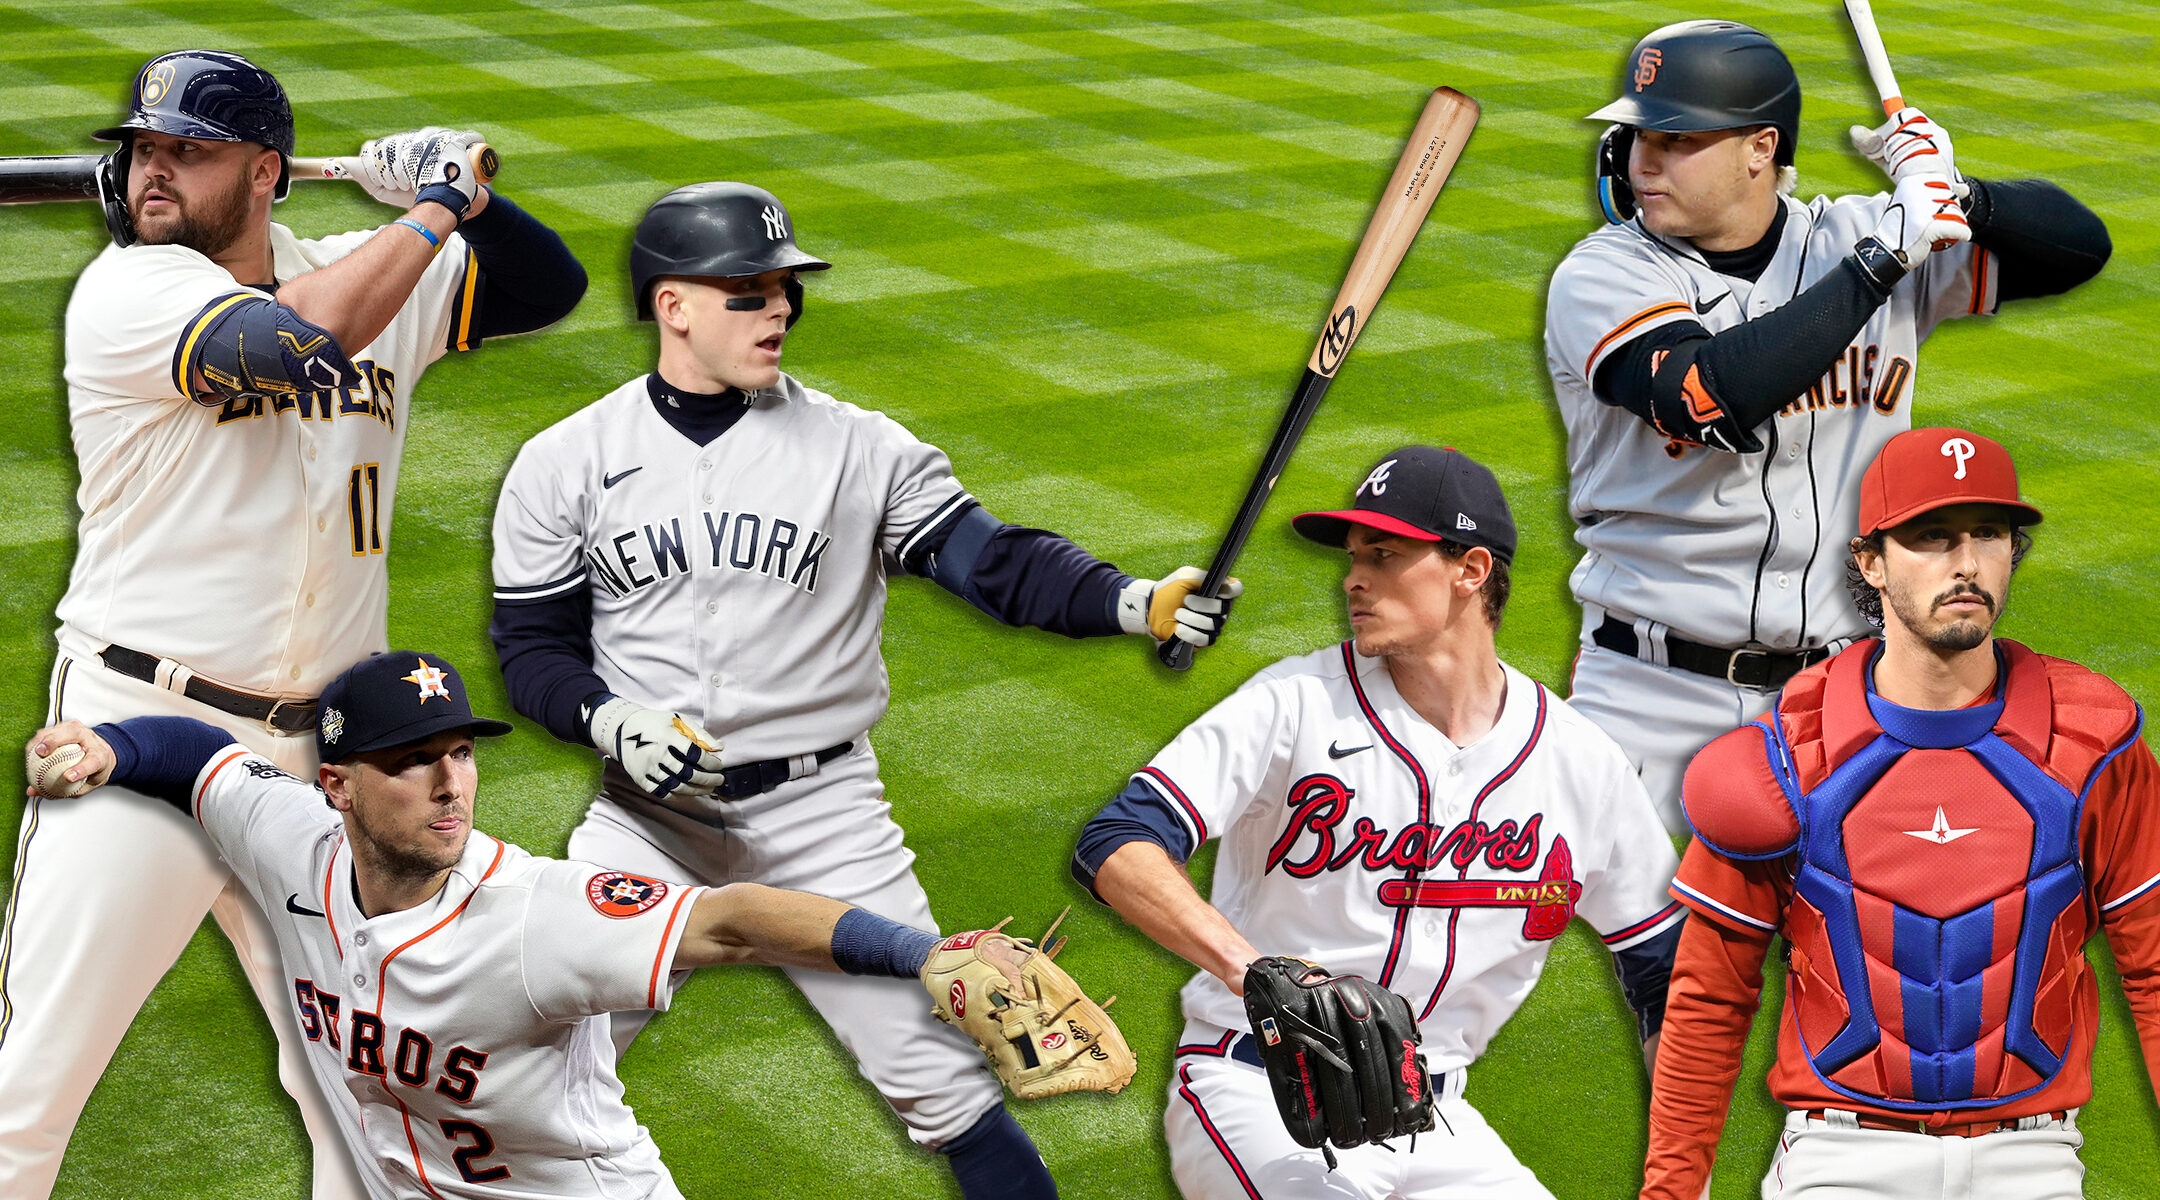 Most MLB All-Star players for one team: Braves, Rangers make